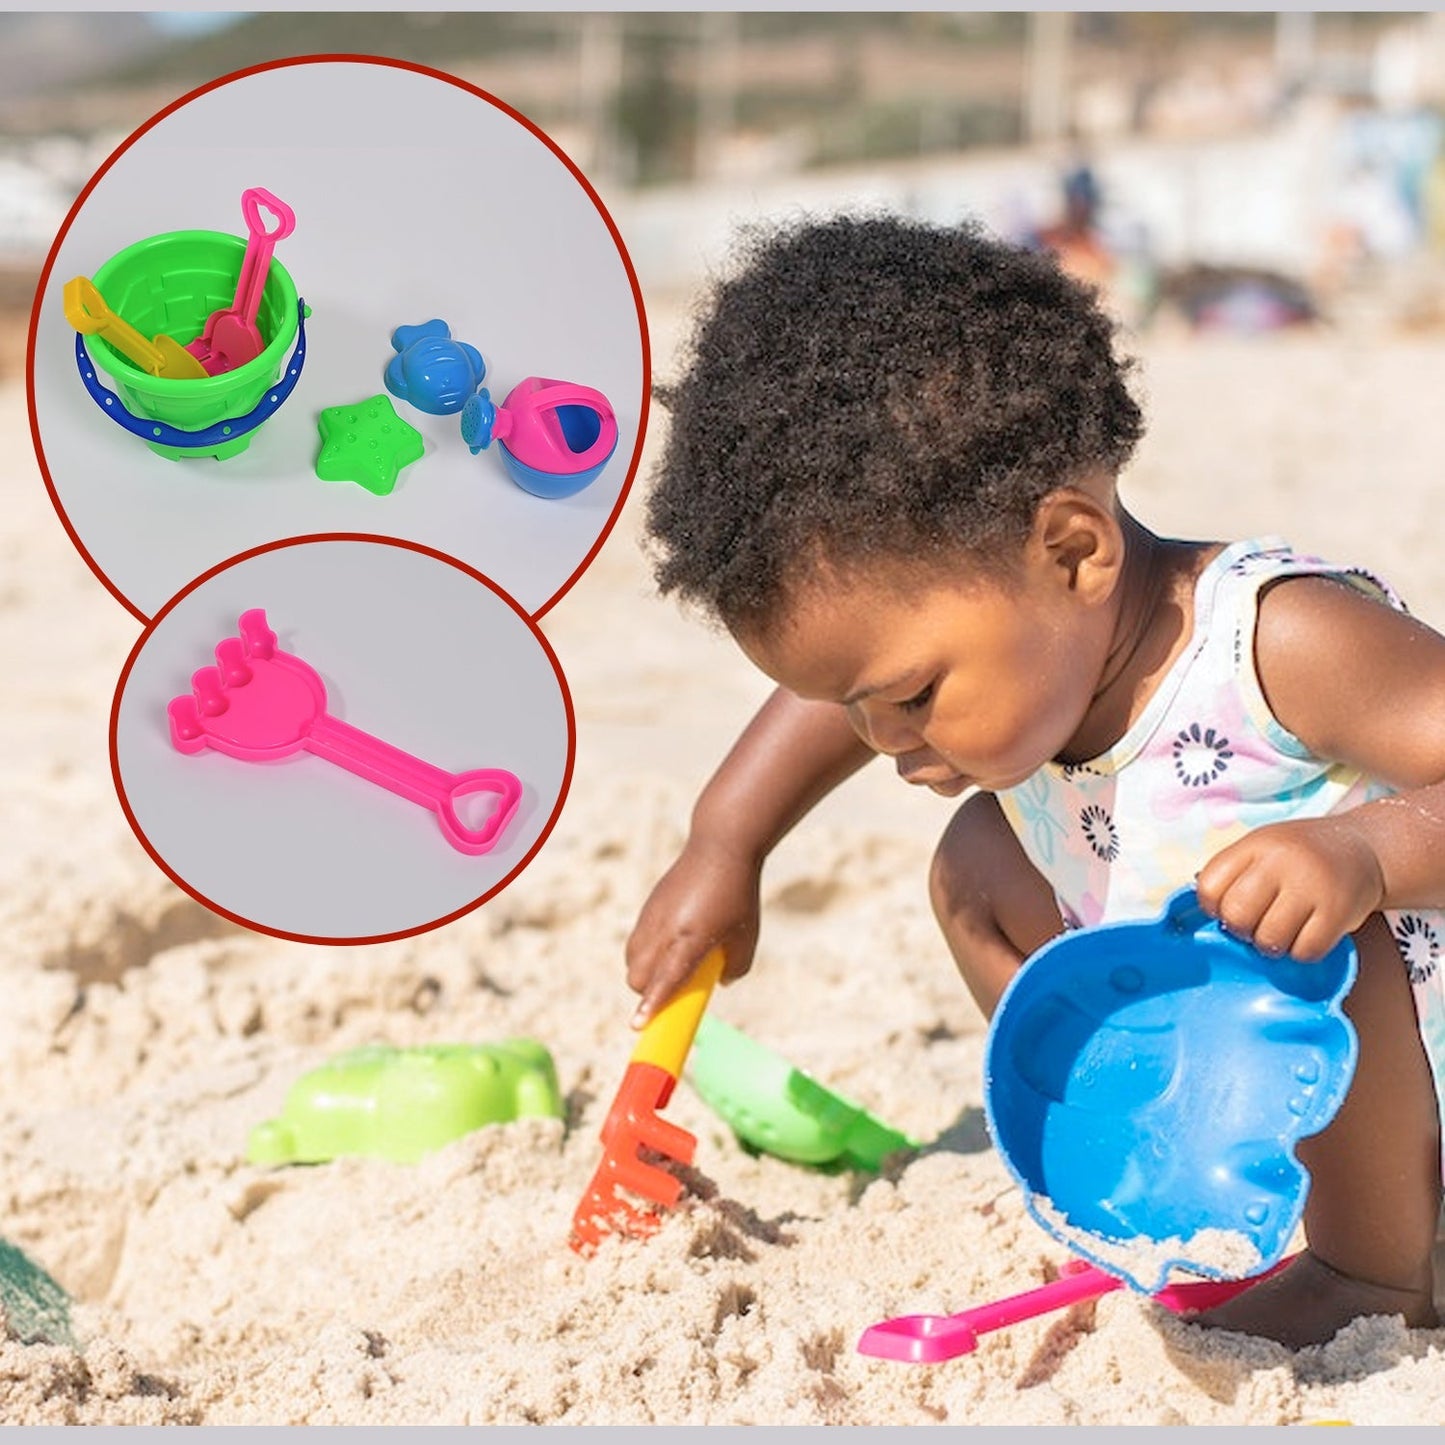 4486 Sand Game Castle Building Plastic Beach Toy Set for Kids Summer Fun Creative Activity Playset& Gardening Tool with Accessories & Bucket-Pack of 6 Pcs DeoDap